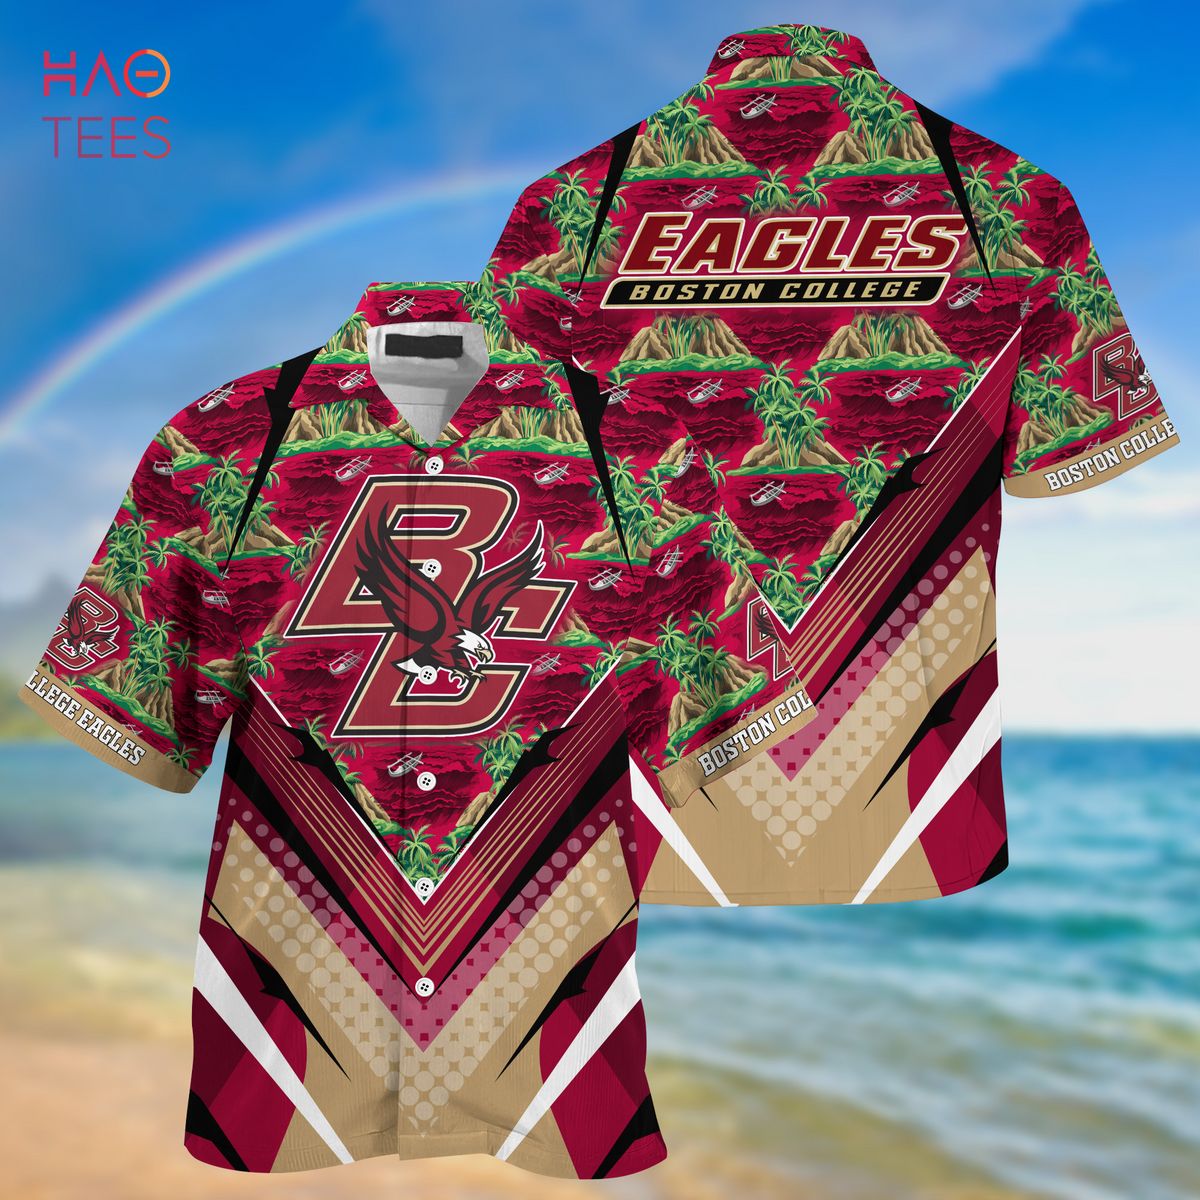 [TRENDING] Boston College Eagles Summer Hawaiian Shirt And Shorts, For Sports Fans This Season